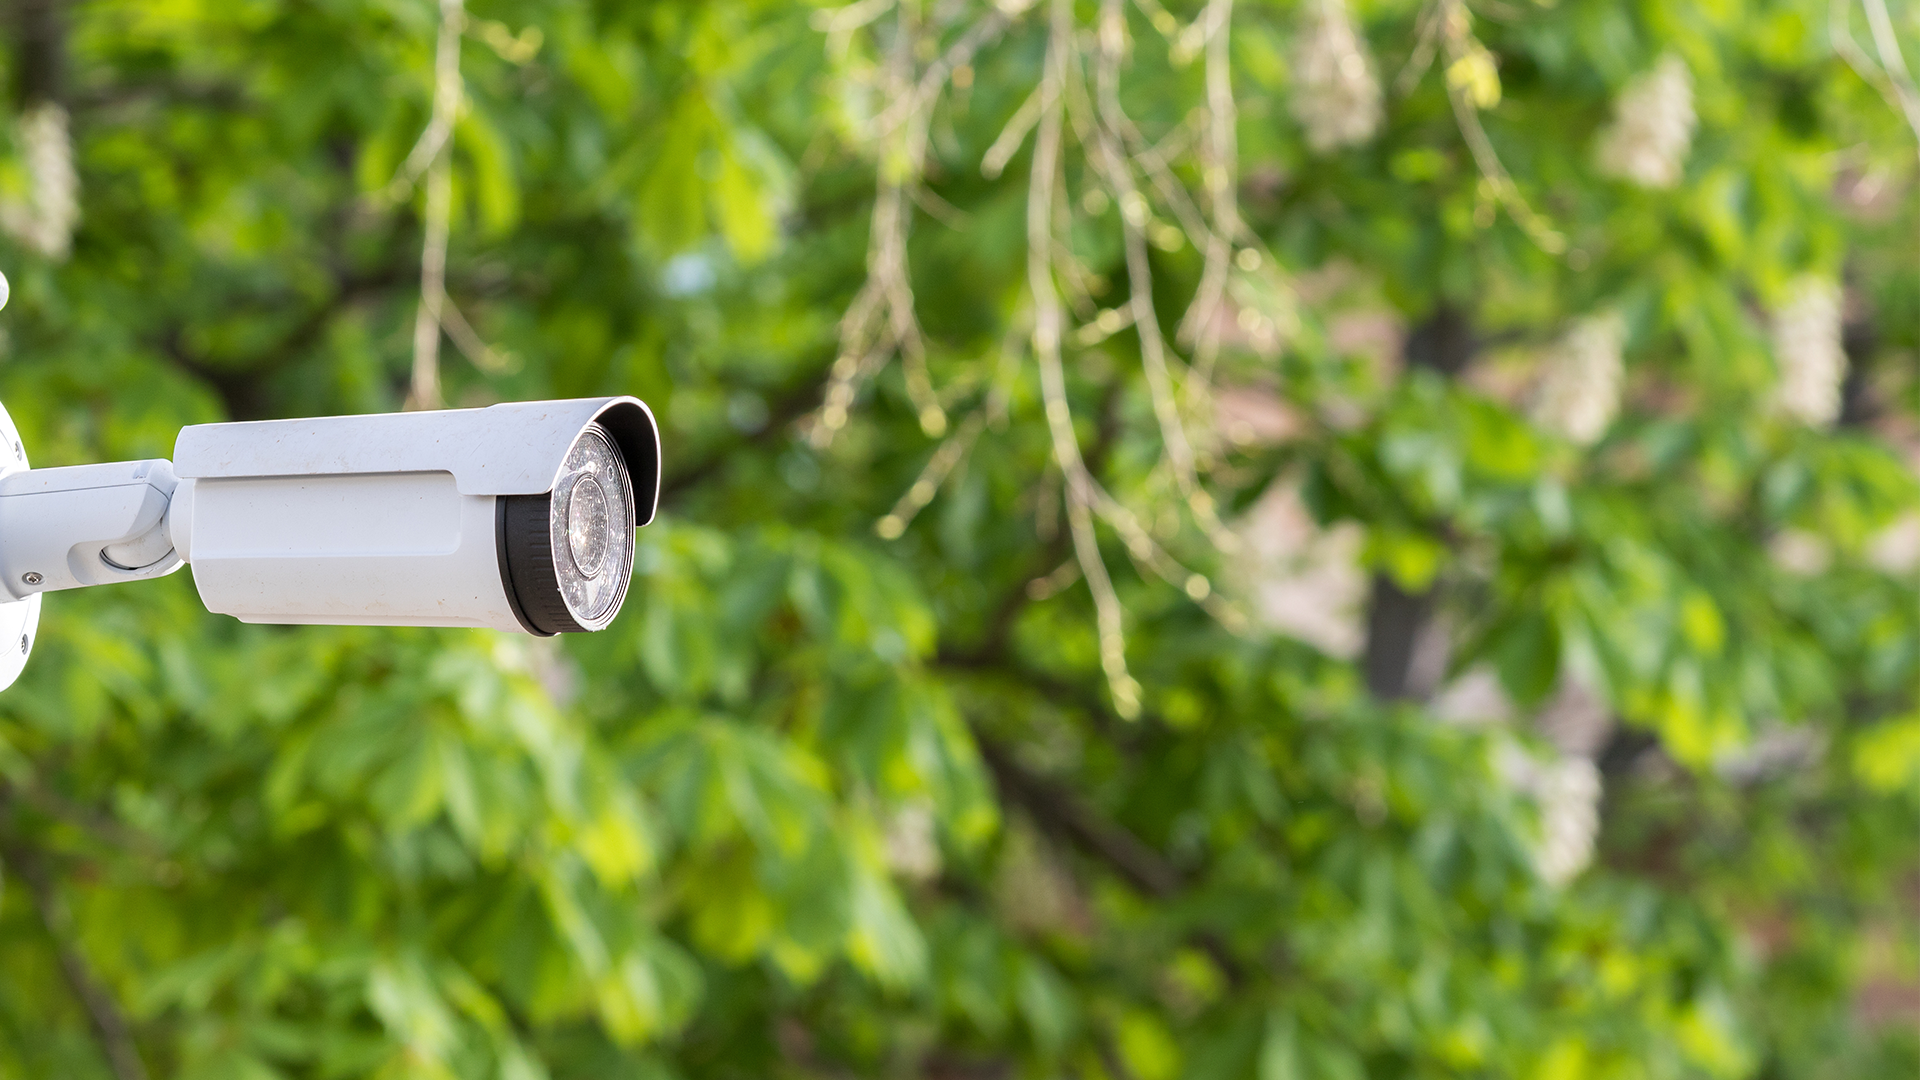 Common Security Camera Placement Mistakes To Avoid - blog | Betafence SA